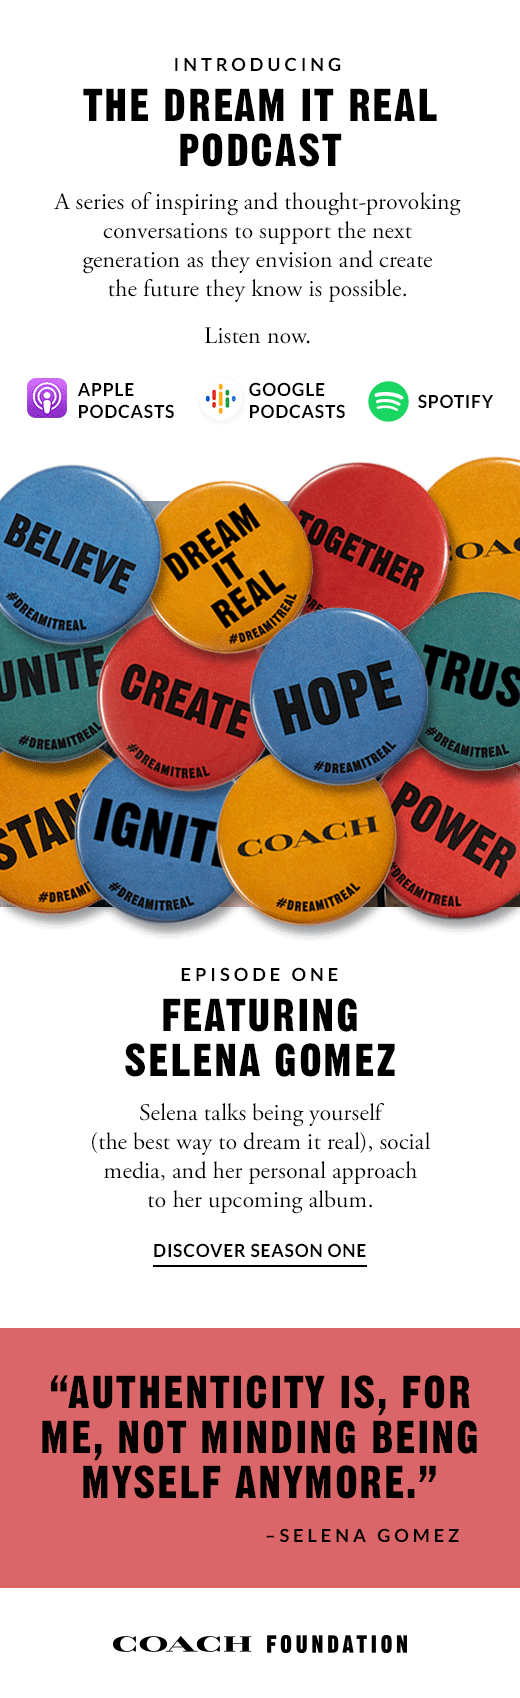 4.15.2019_CoachFoundation_DreamItReal_Podcast_Featuring_Selena_Email_v17